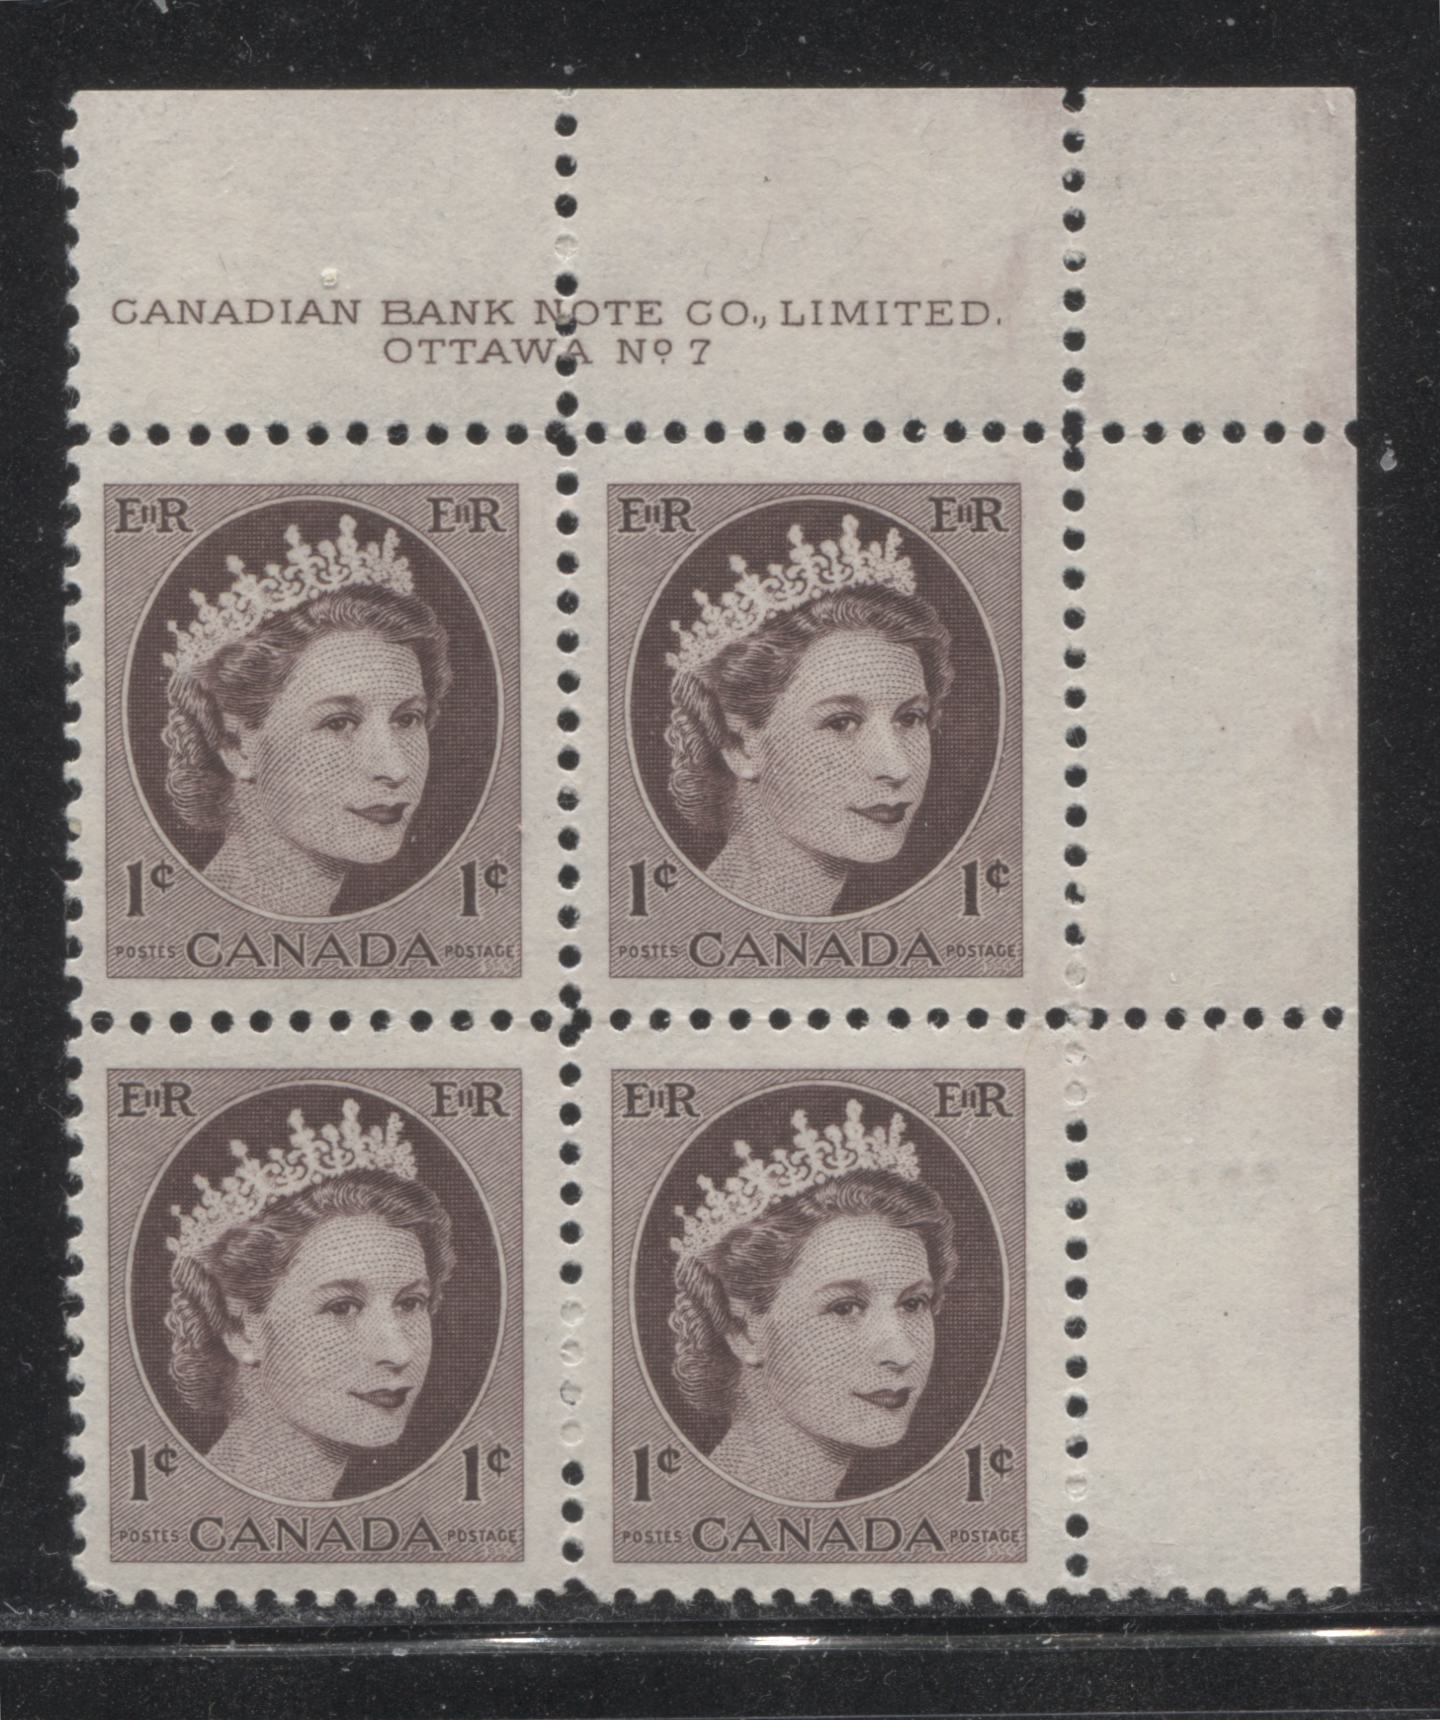 Canada #337 1c Deep Chocolate Queen Elizabeth II, 1954-1962 Wilding Issue, Upper Right Plate 7 Block of 4, Perf. 11.95, Bright DF Gr Smooth Vertical Wove, Streaky Satin Gum, VFNH Brixton Chrome 